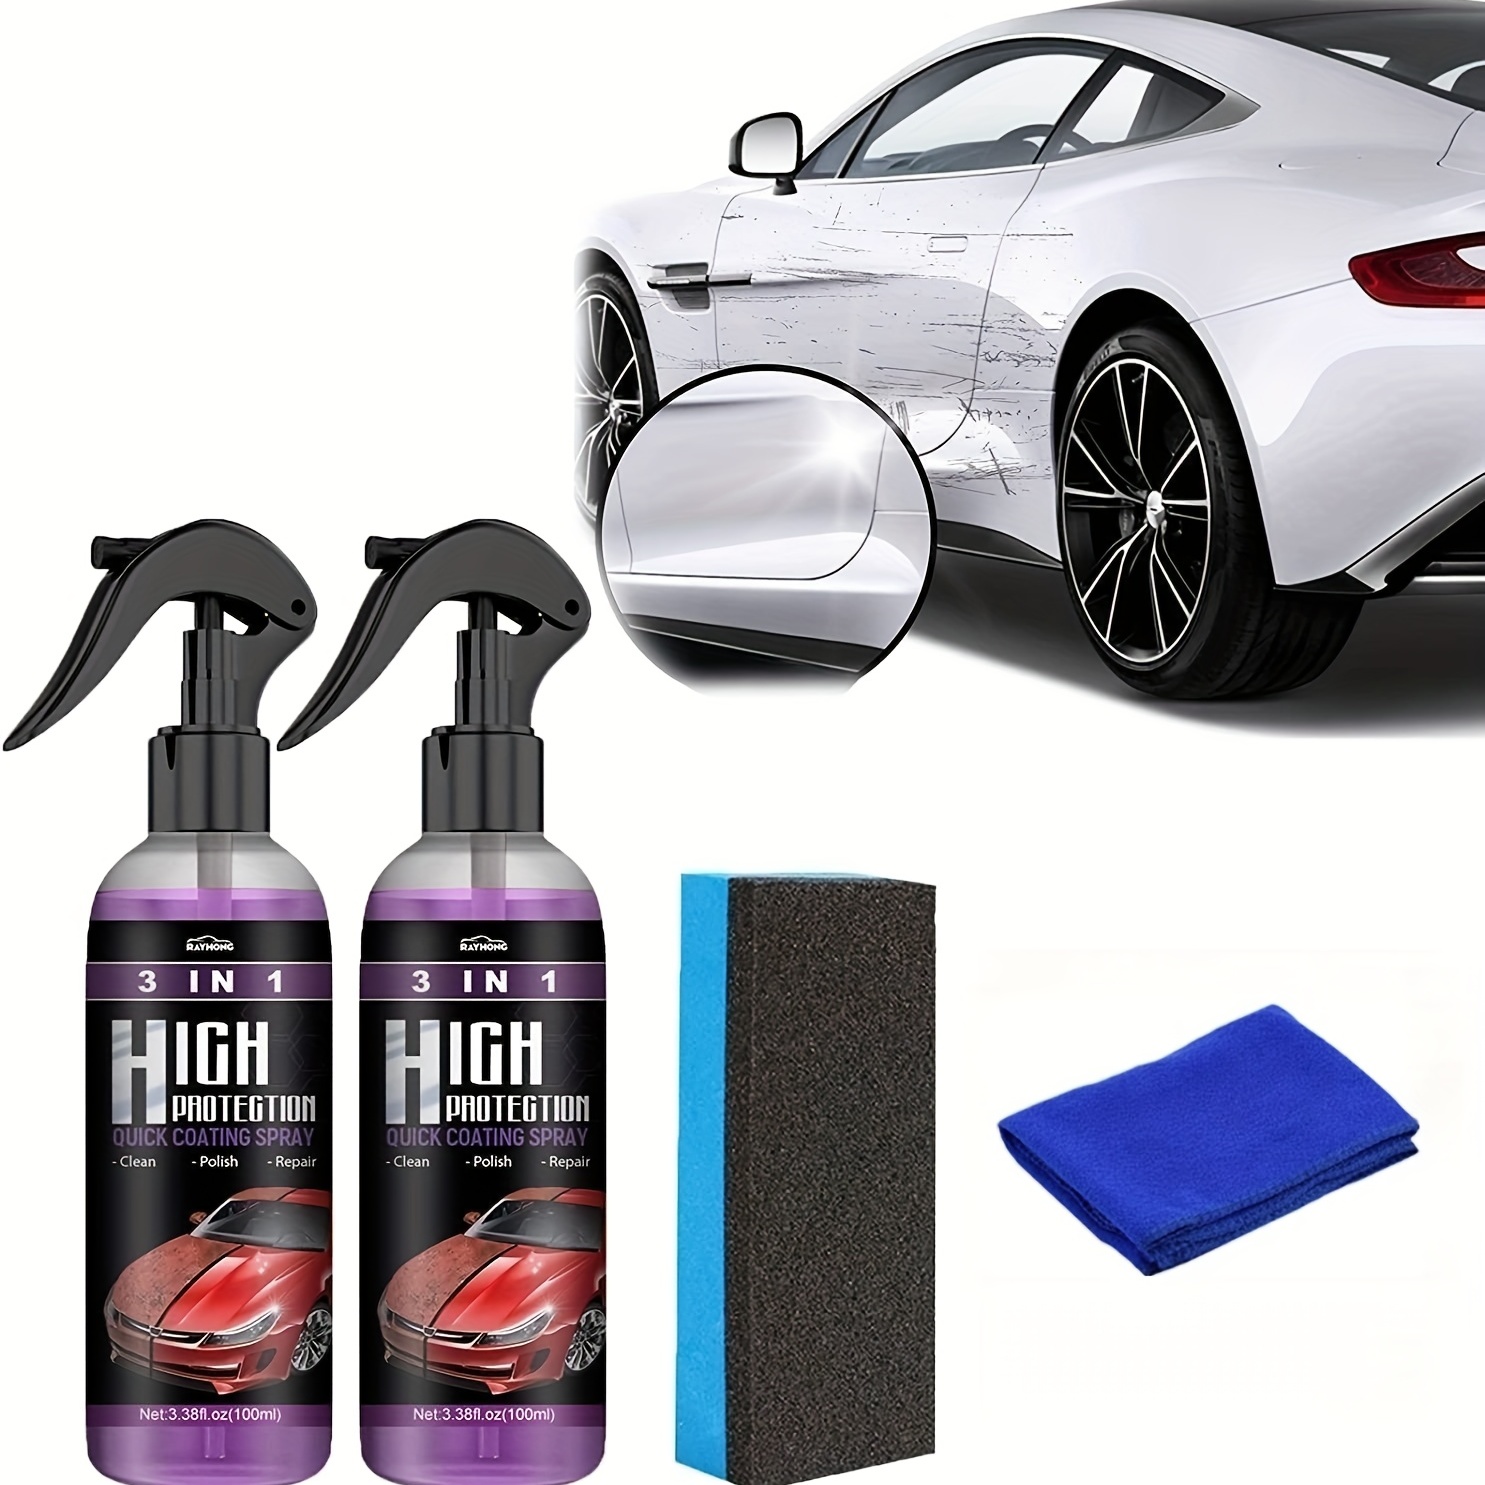 Car Glass Water Repellent Ceramic Coating Hydrophobic Agent For Car  Exterior Glass, Windshield & Mirror Rainproof Spray Improved Visibility,  3.38oz